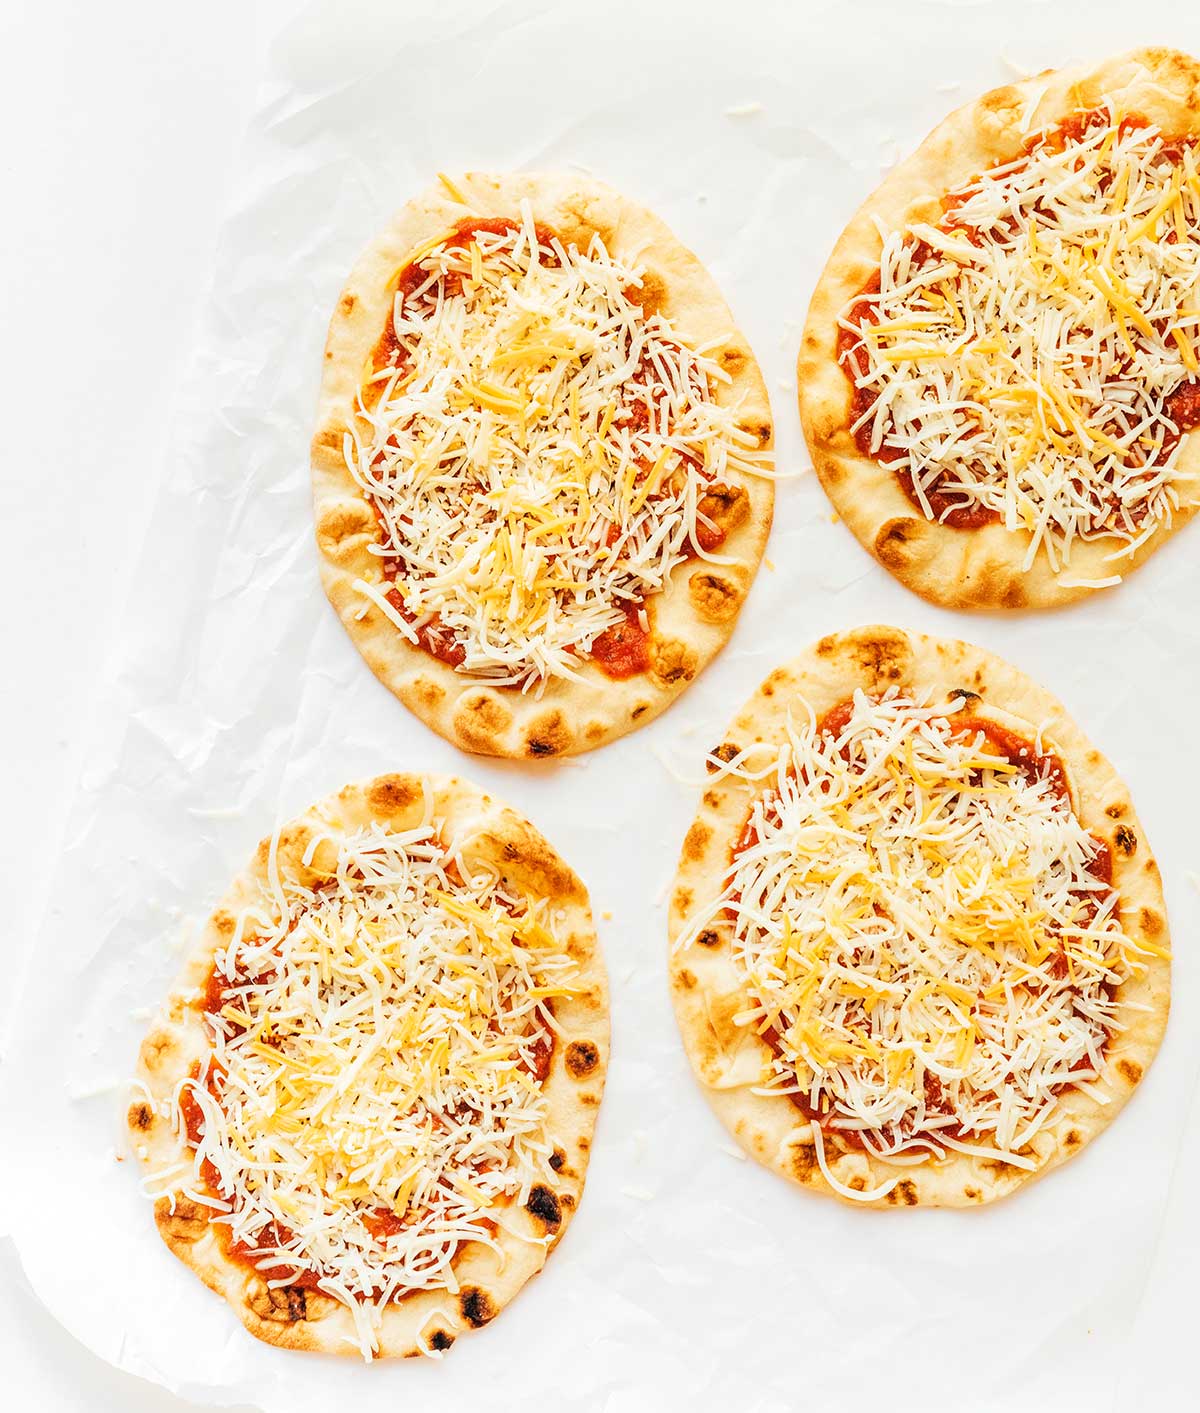 Four uncooked naan pizzas topped with sauce, mozzarella, and cheddar cheese